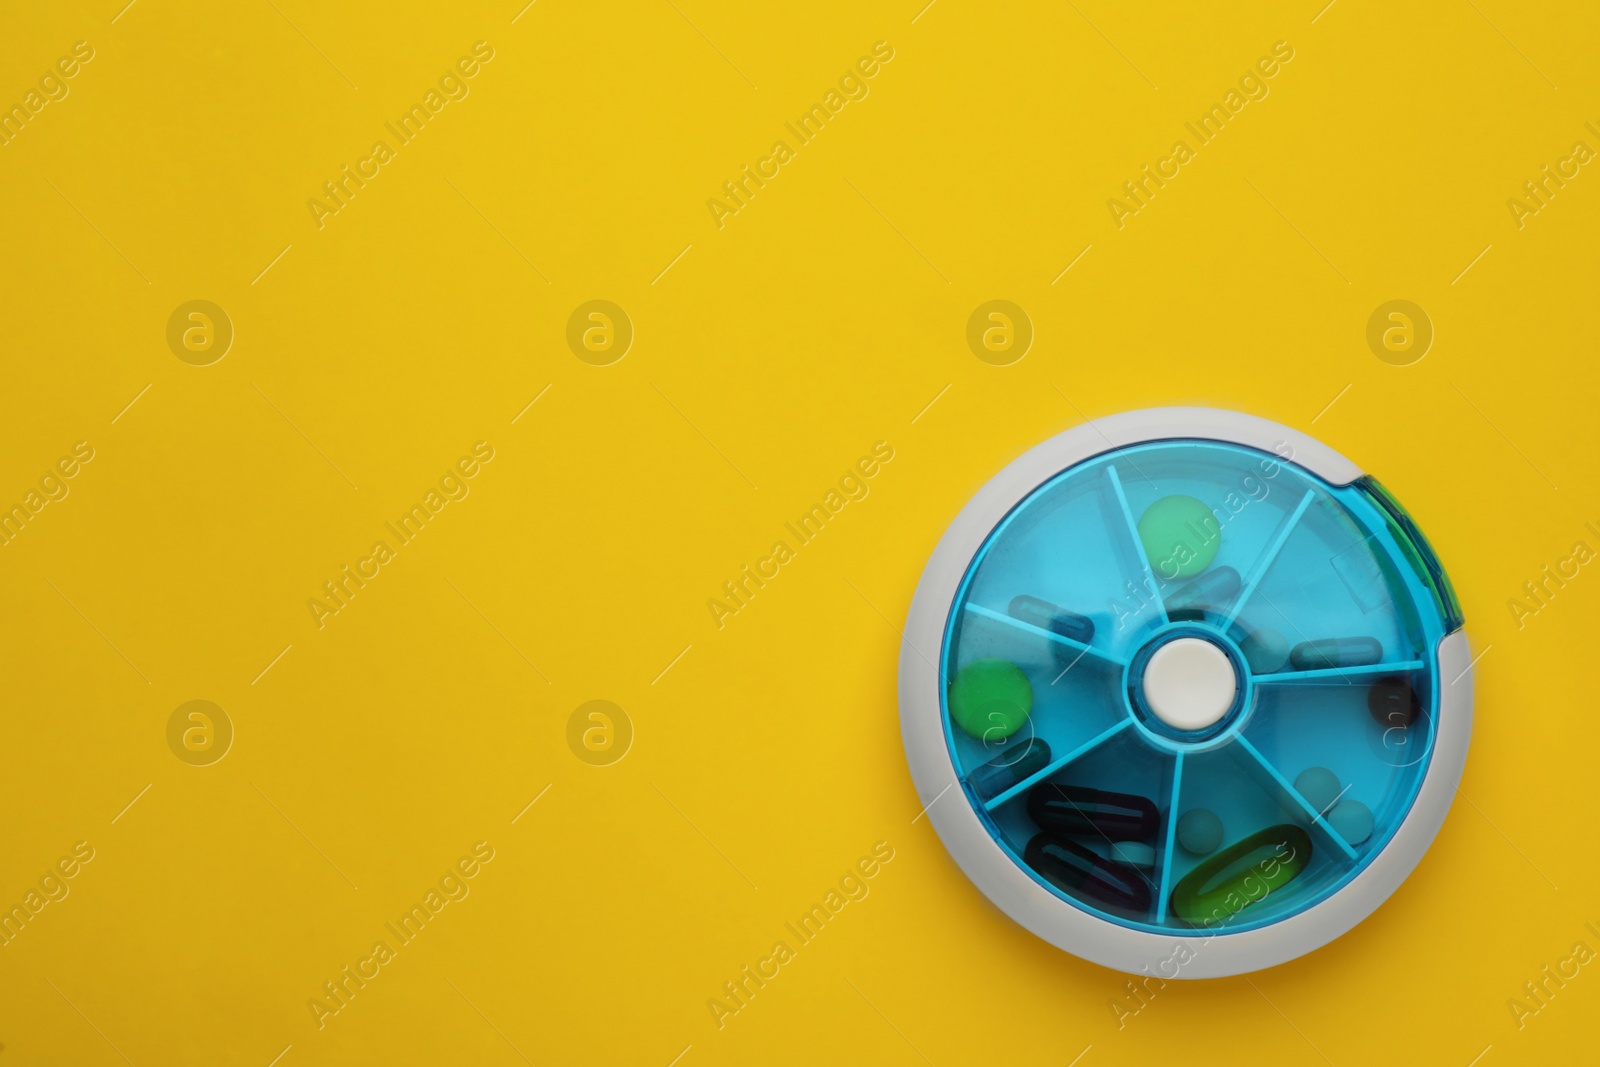 Photo of Plastic box with different pills on yellow background, top view. Space for text